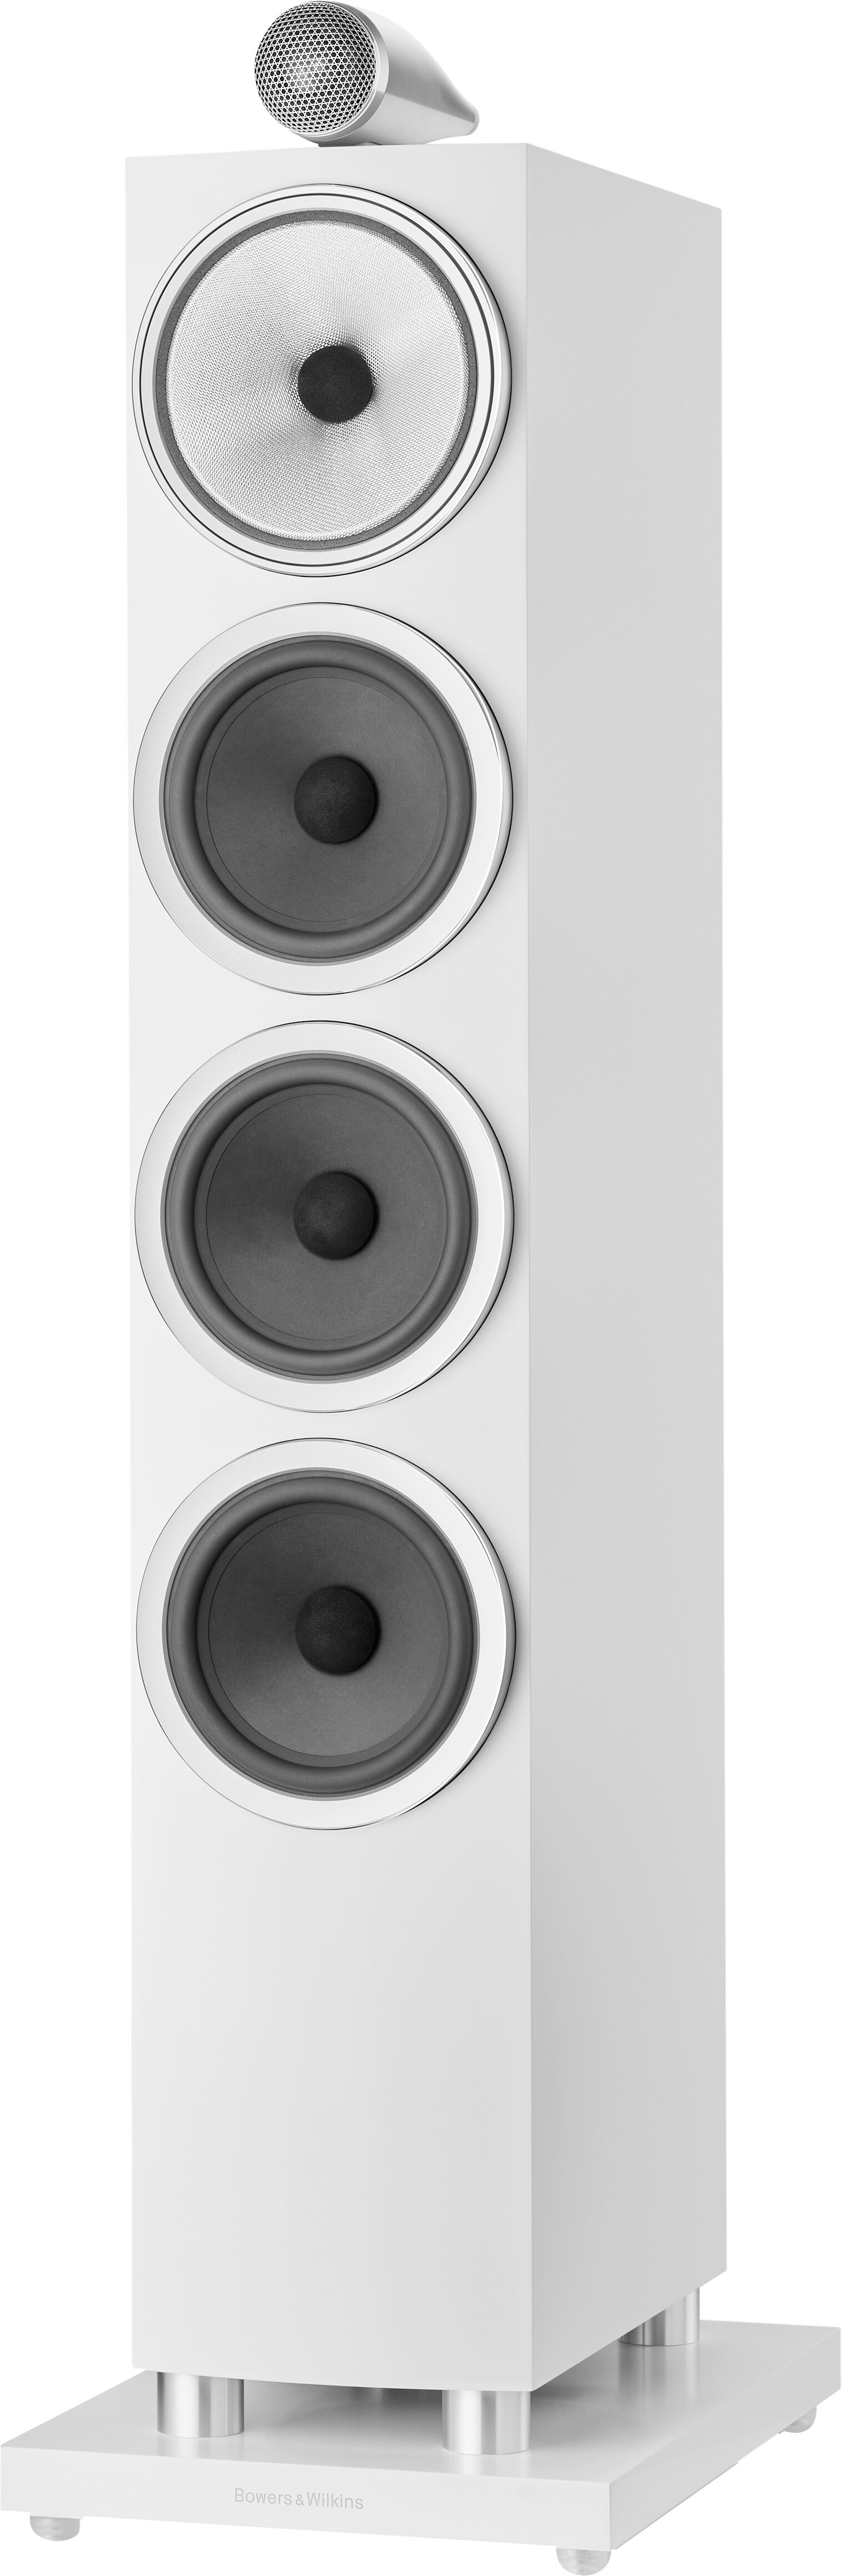 Bowers & Wilkins Series 3 Floorstanding Speaker with On and Three 6.5" Bass Drivers (Each) White 702S3White - Best Buy